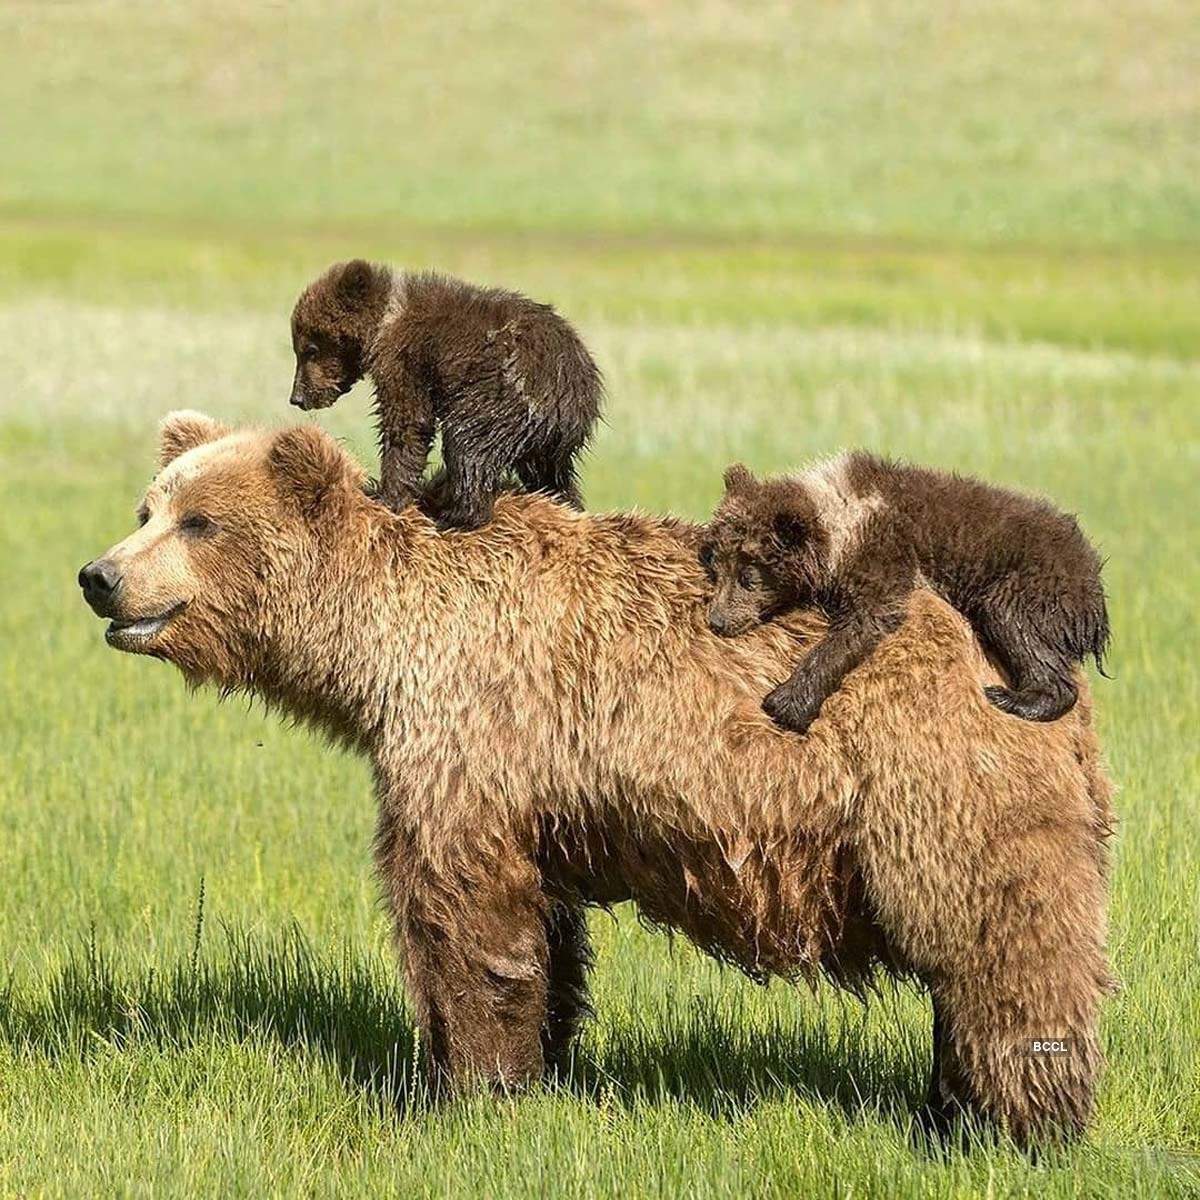 Mother's Day Special! Adorable pictures of animal moms with their little offspring